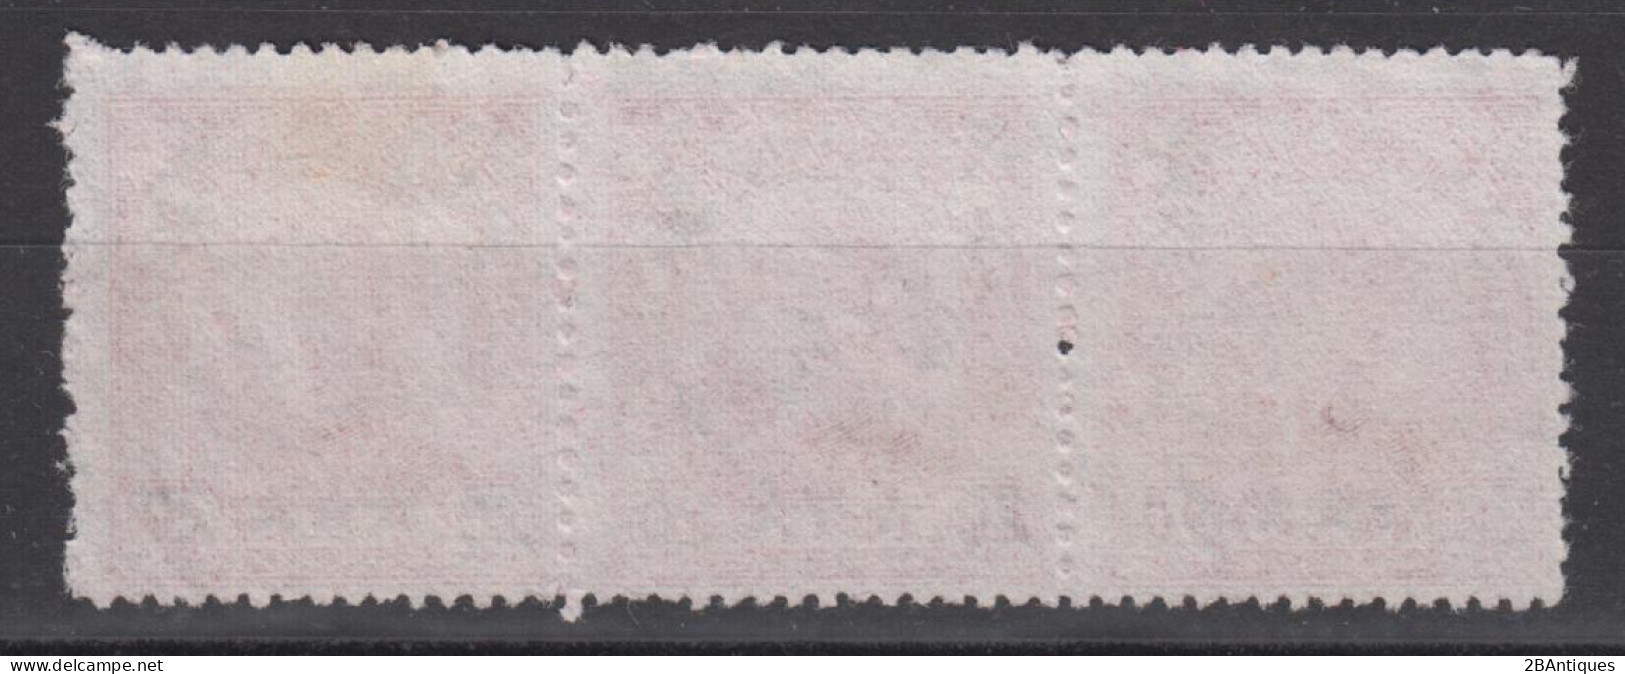 TAIWAN 1949-1950 - North East China Postage Stamps Surcharged STRIP OF 3 - Gebruikt